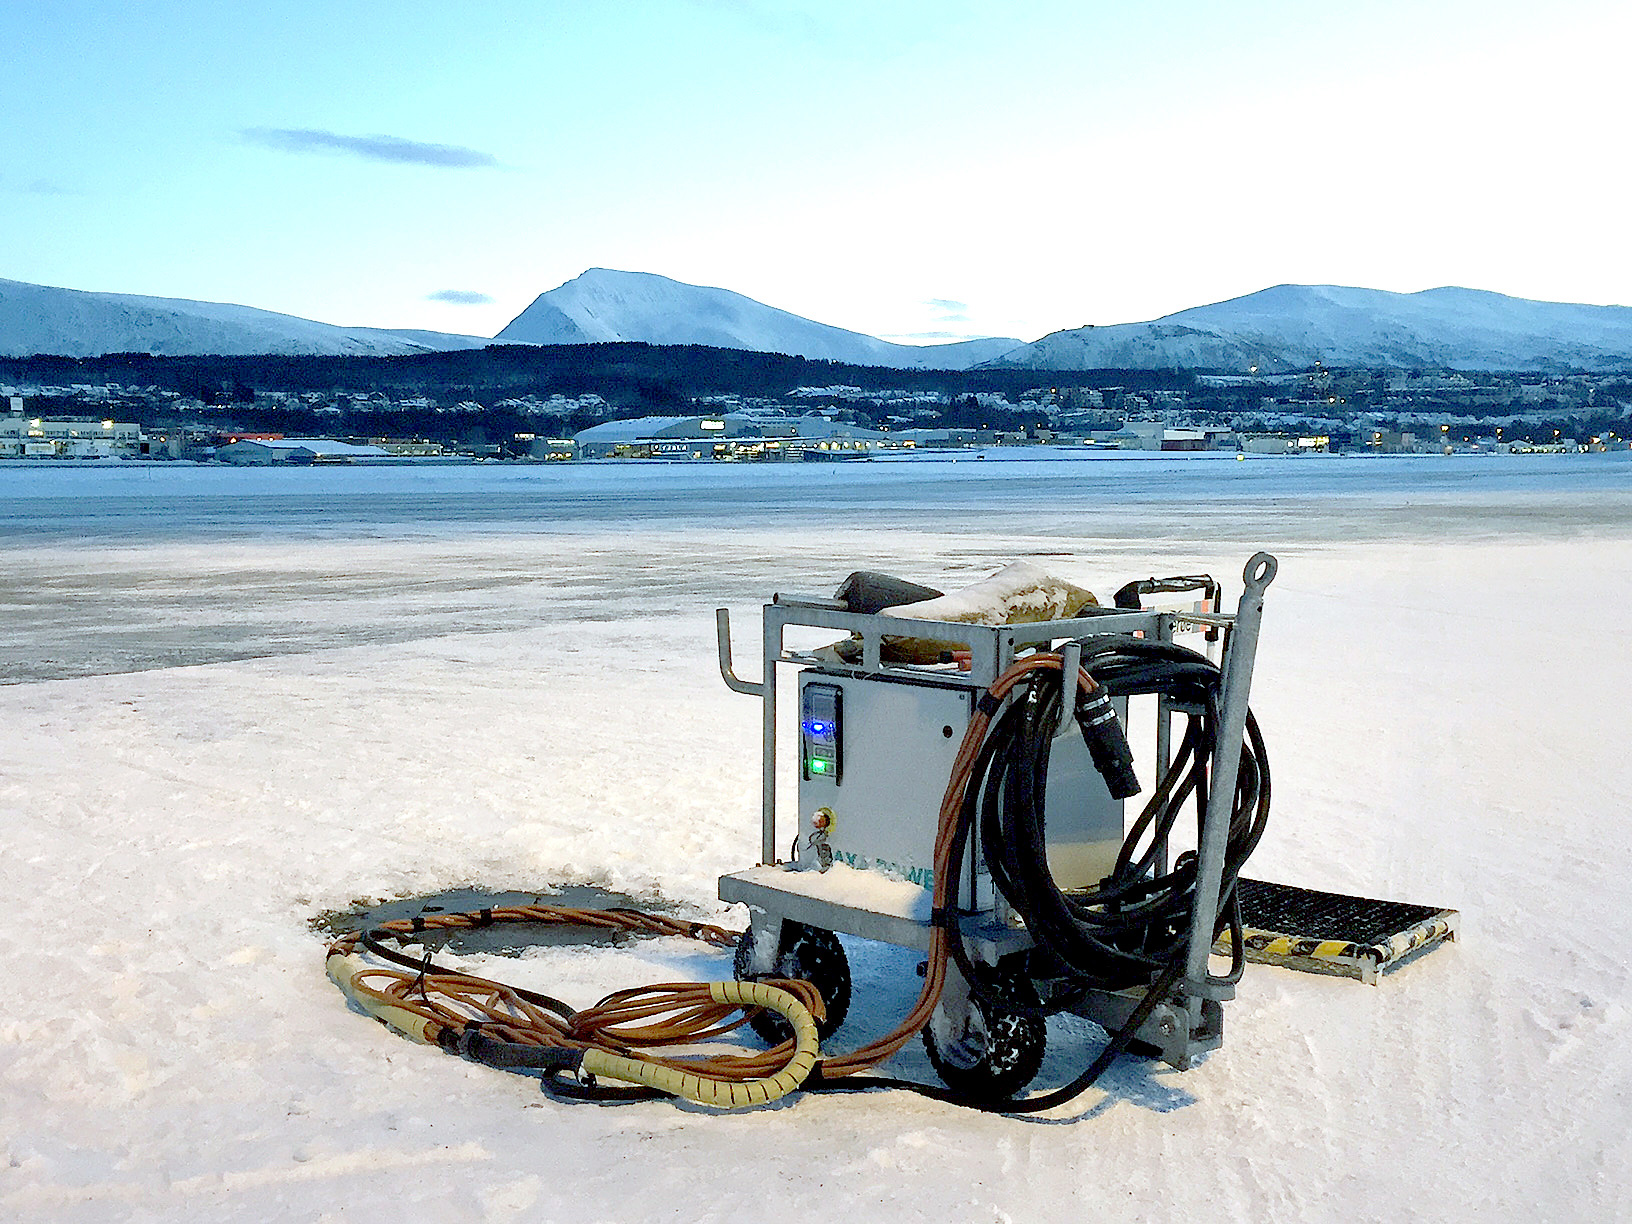 ITW GSE 28 VDC solid-state Ground Power Unit, Ground Power Unit, Harsh Weather Conditions, Snow and ice